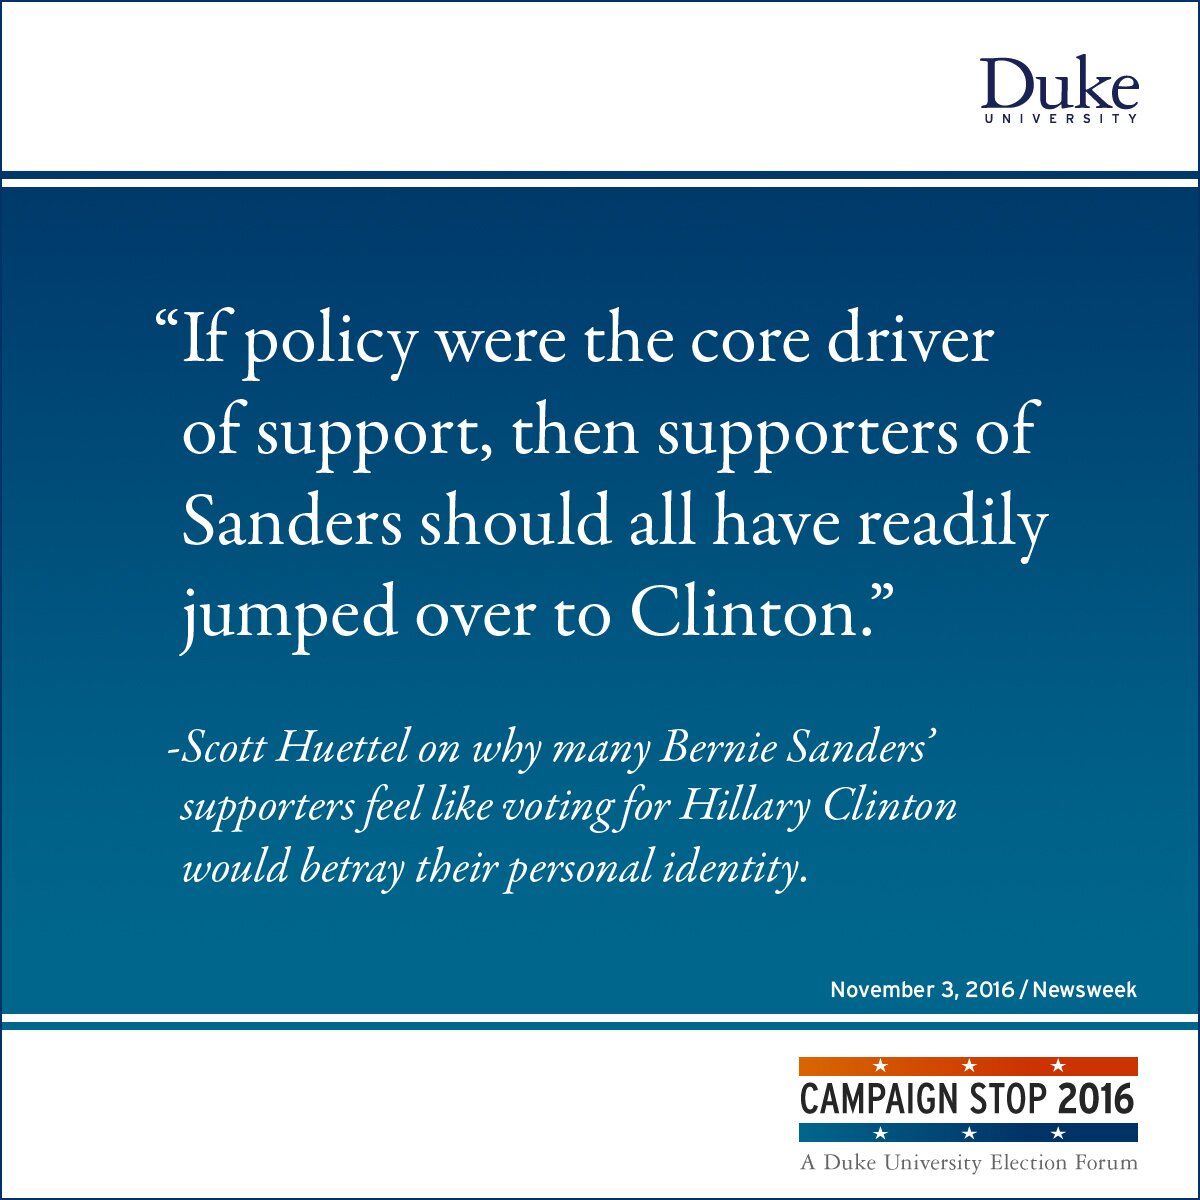 “If policy were the core driver of support, then supporters of Sanders should all have readily jumped over to Clinton.” -Scott Huettel on why many Bernie Sanders’ supporters feel like voting for Hillary Clinton would betray their personal identity.